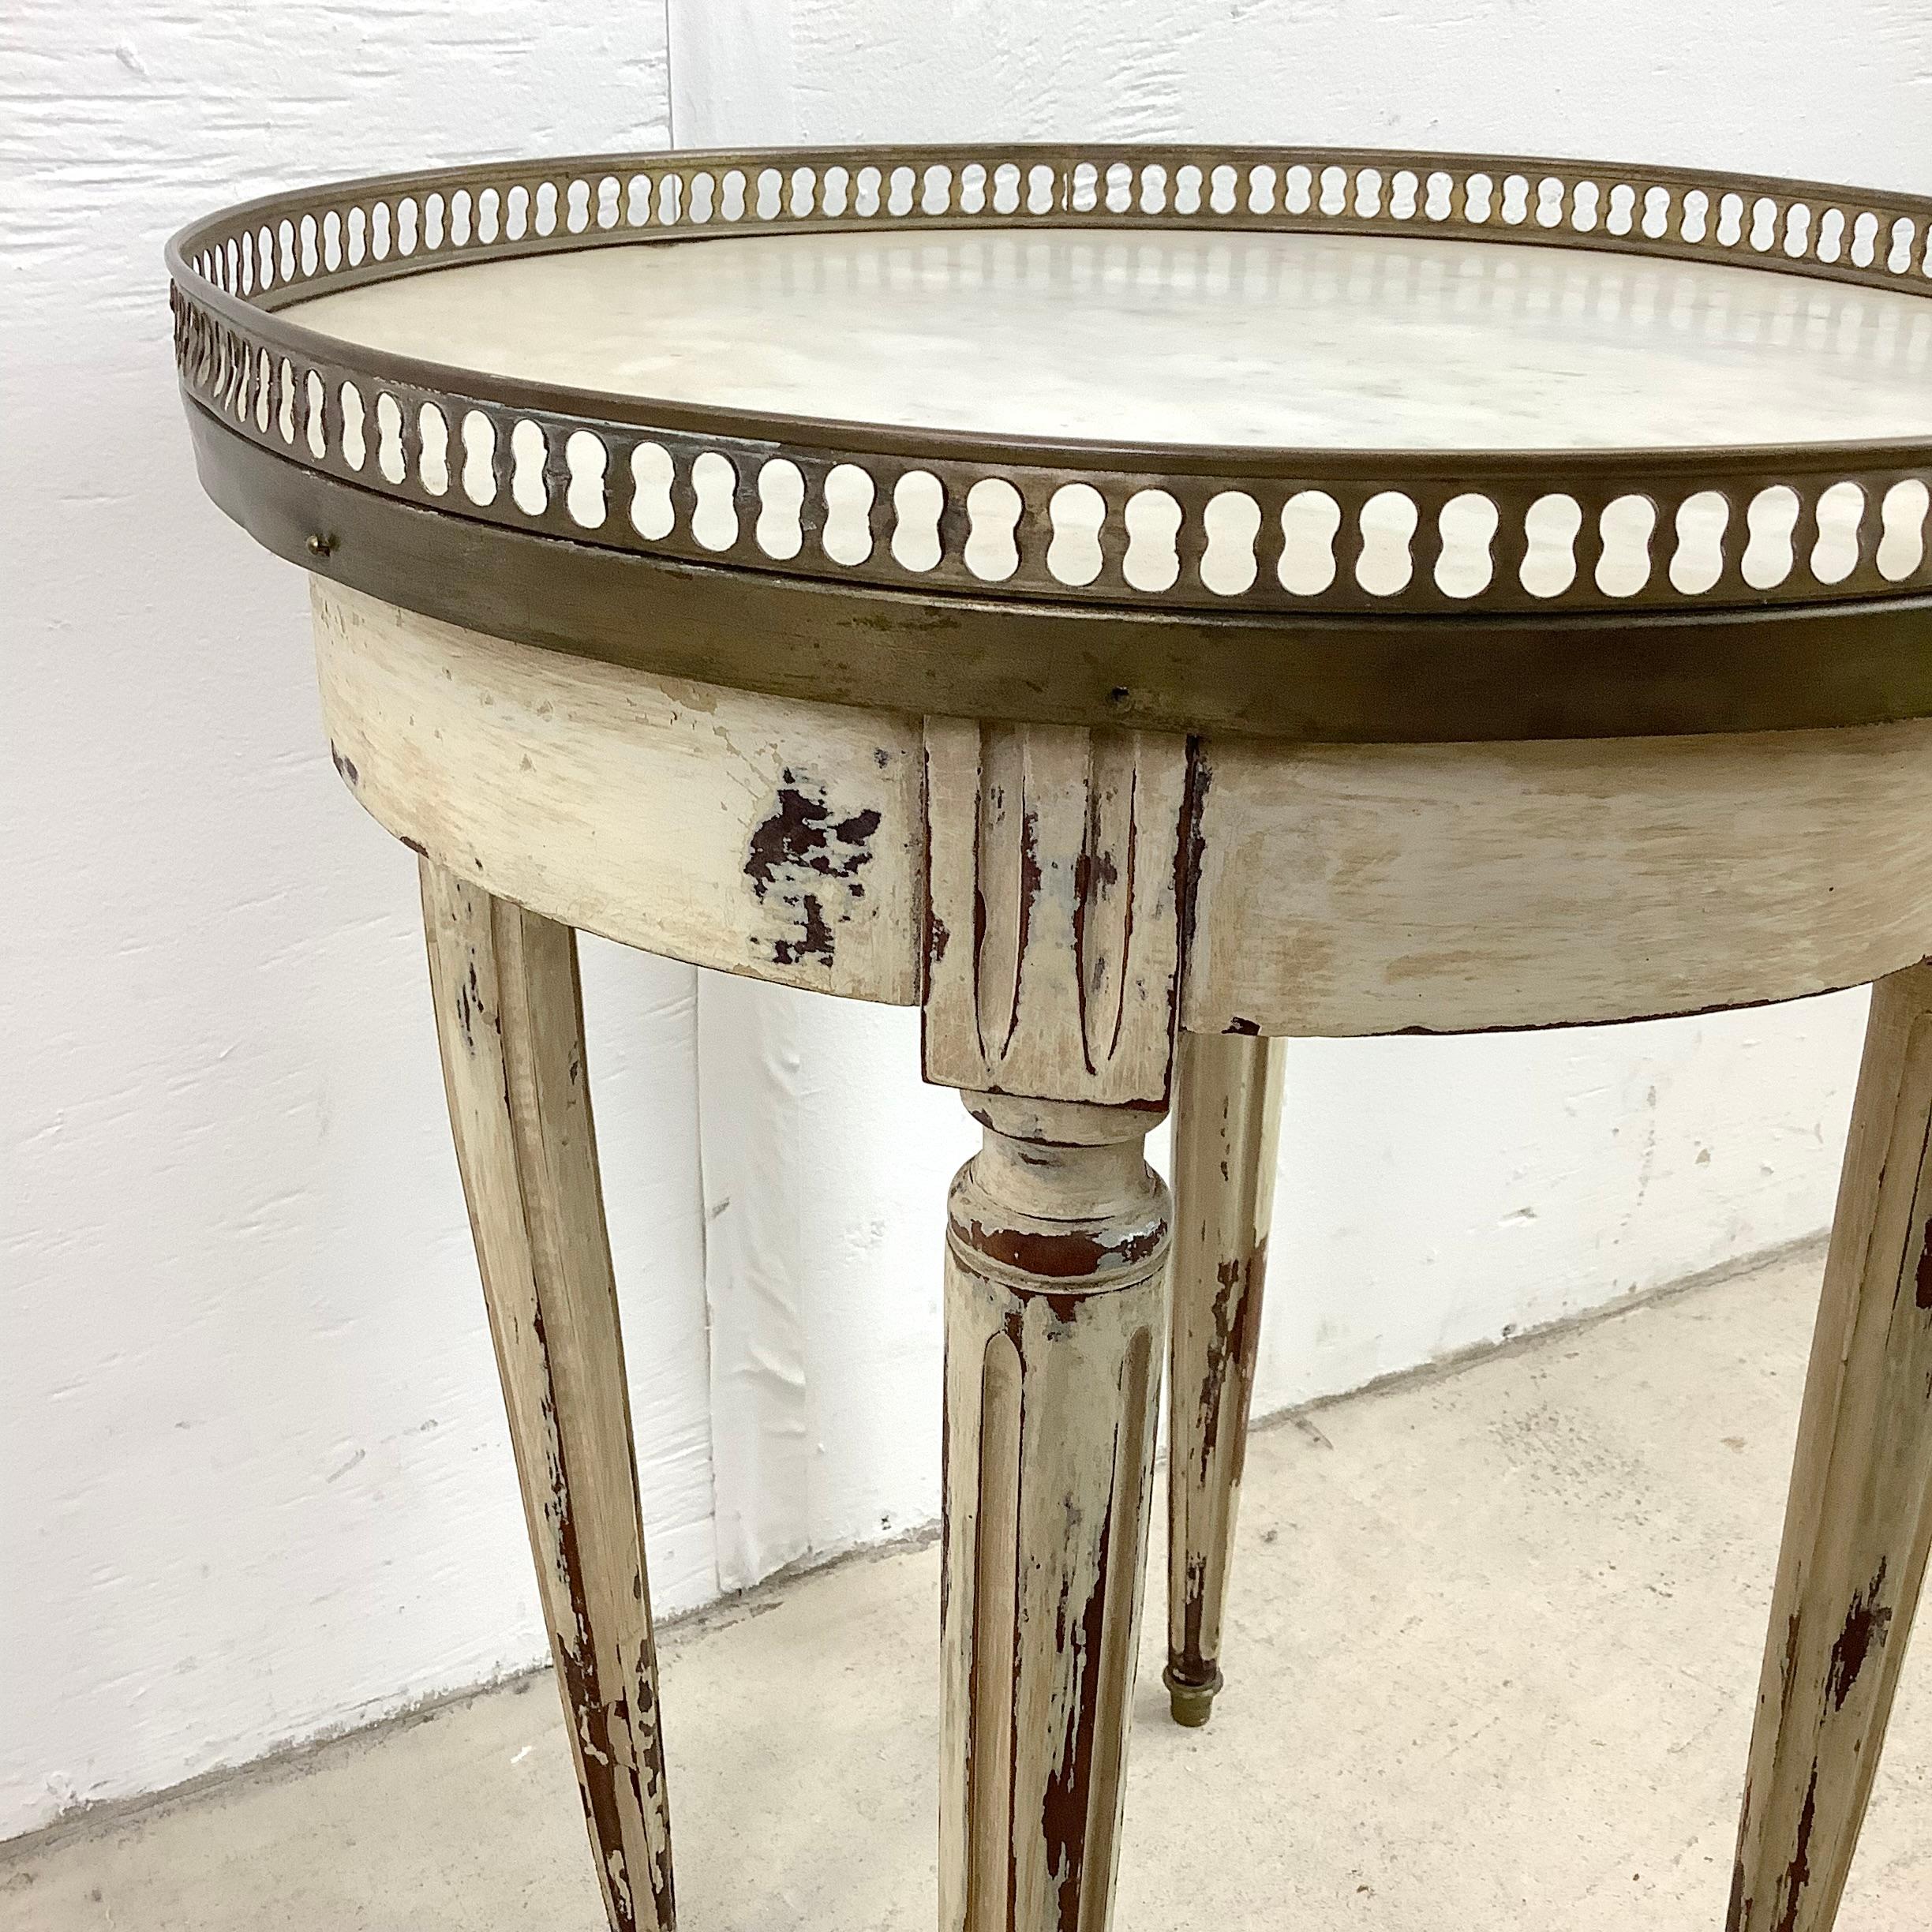 Stone Vintage French Country Style Side Table or Display Table